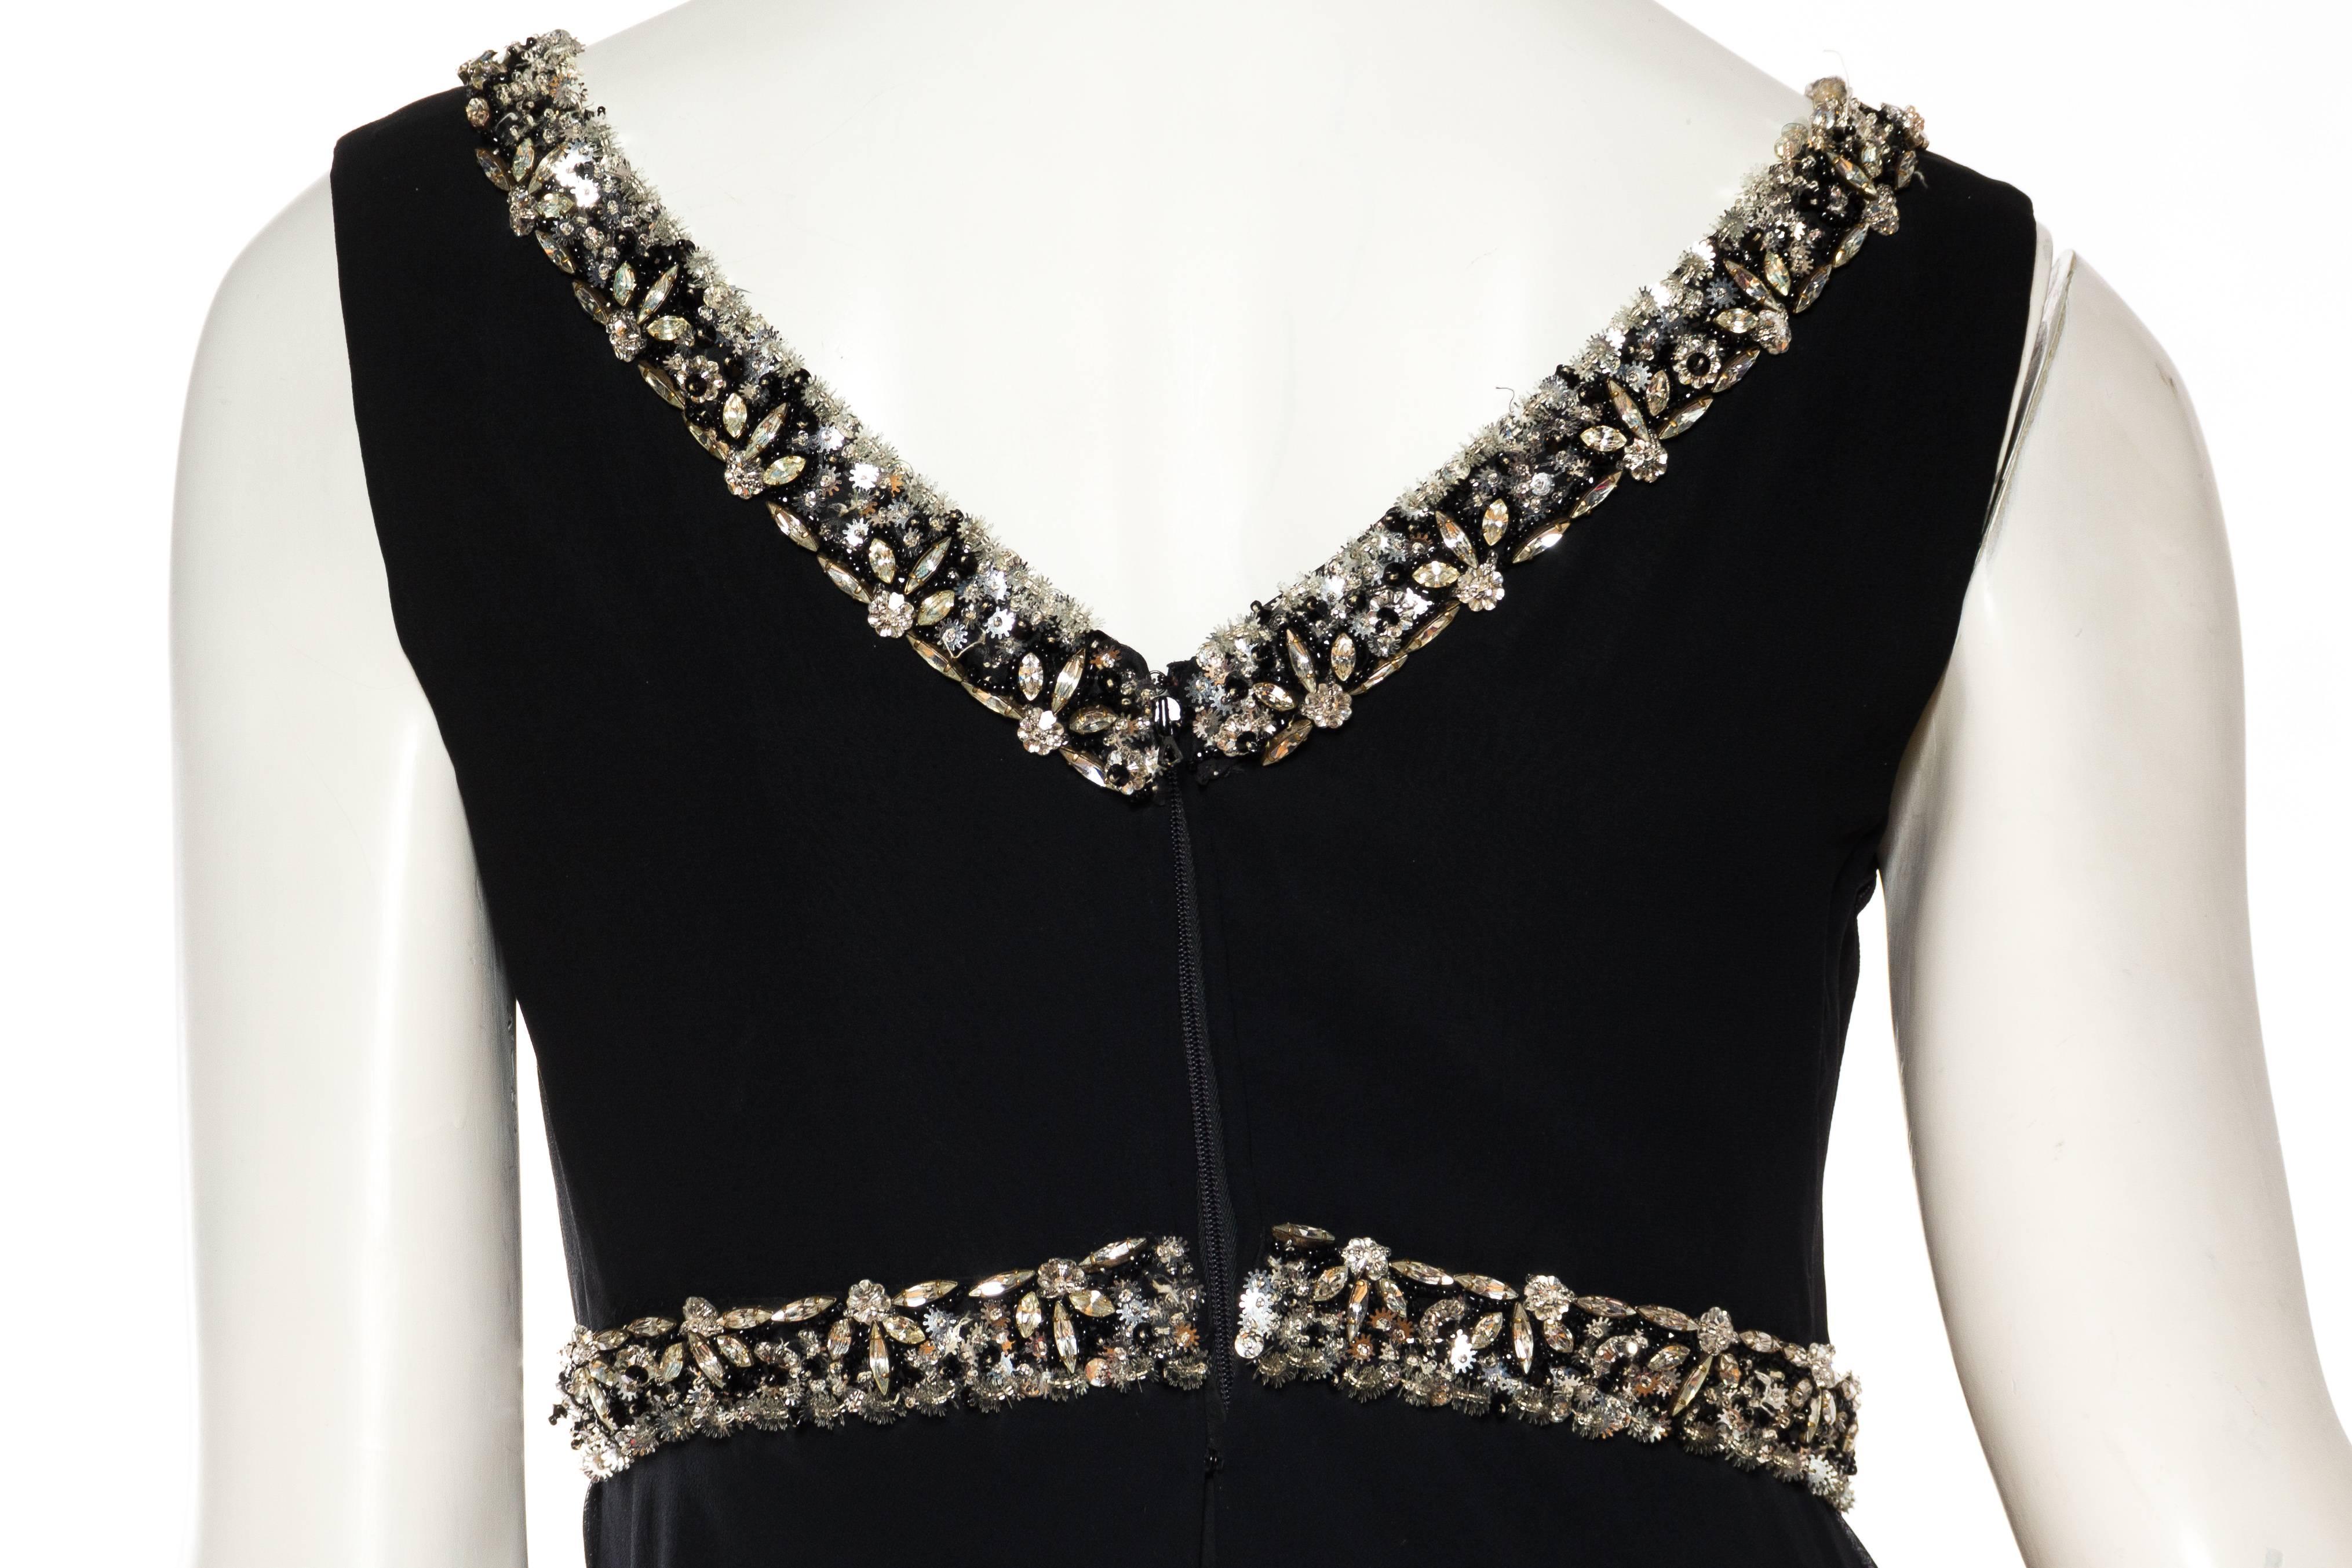 1970S RETY OF PARIS Black Haute Couture Silk Chiffon Crystal Beaded Empire Wais For Sale 2